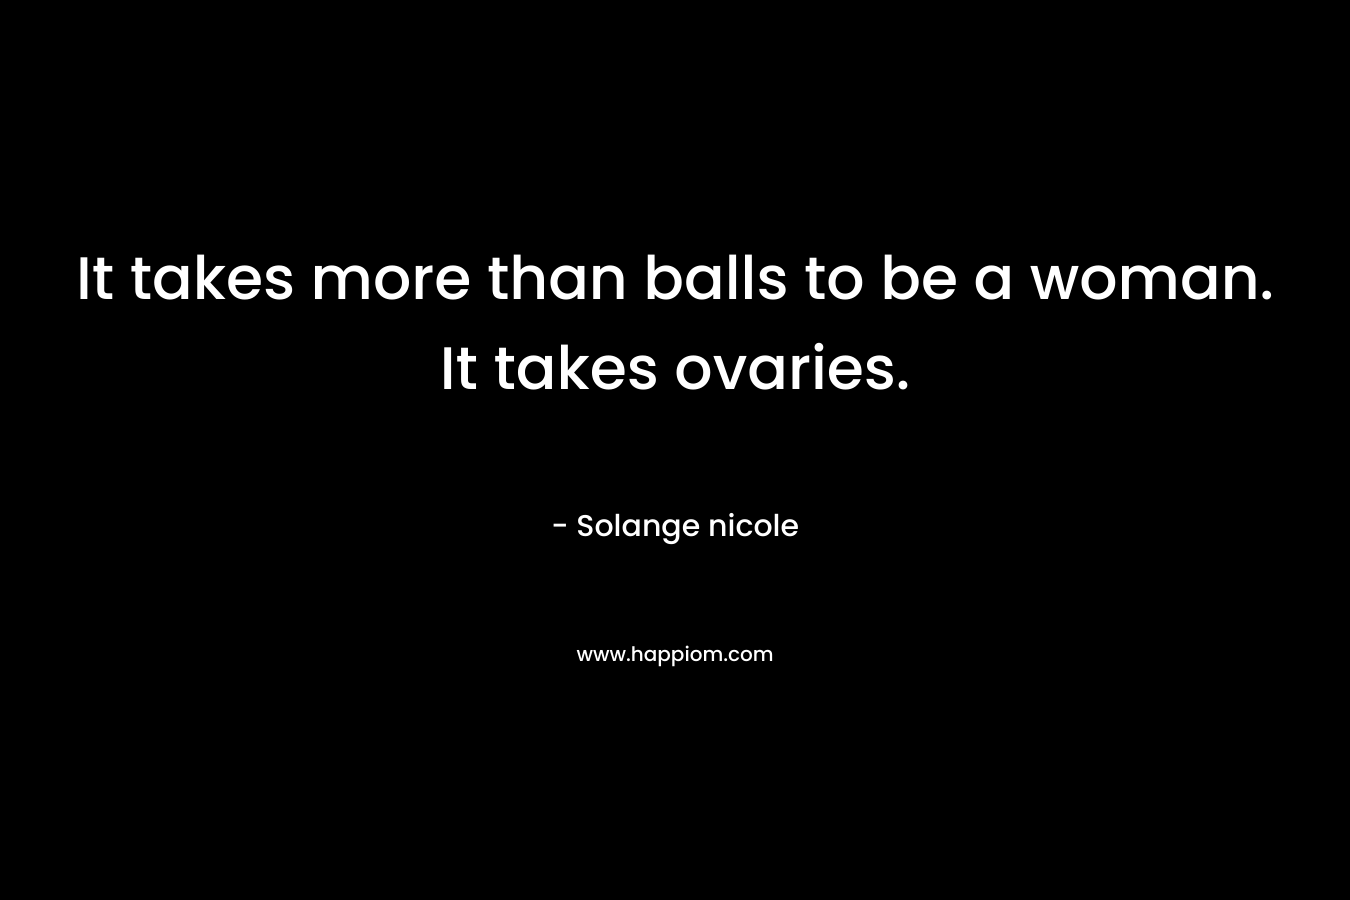 It takes more than balls to be a woman. It takes ovaries. – Solange nicole